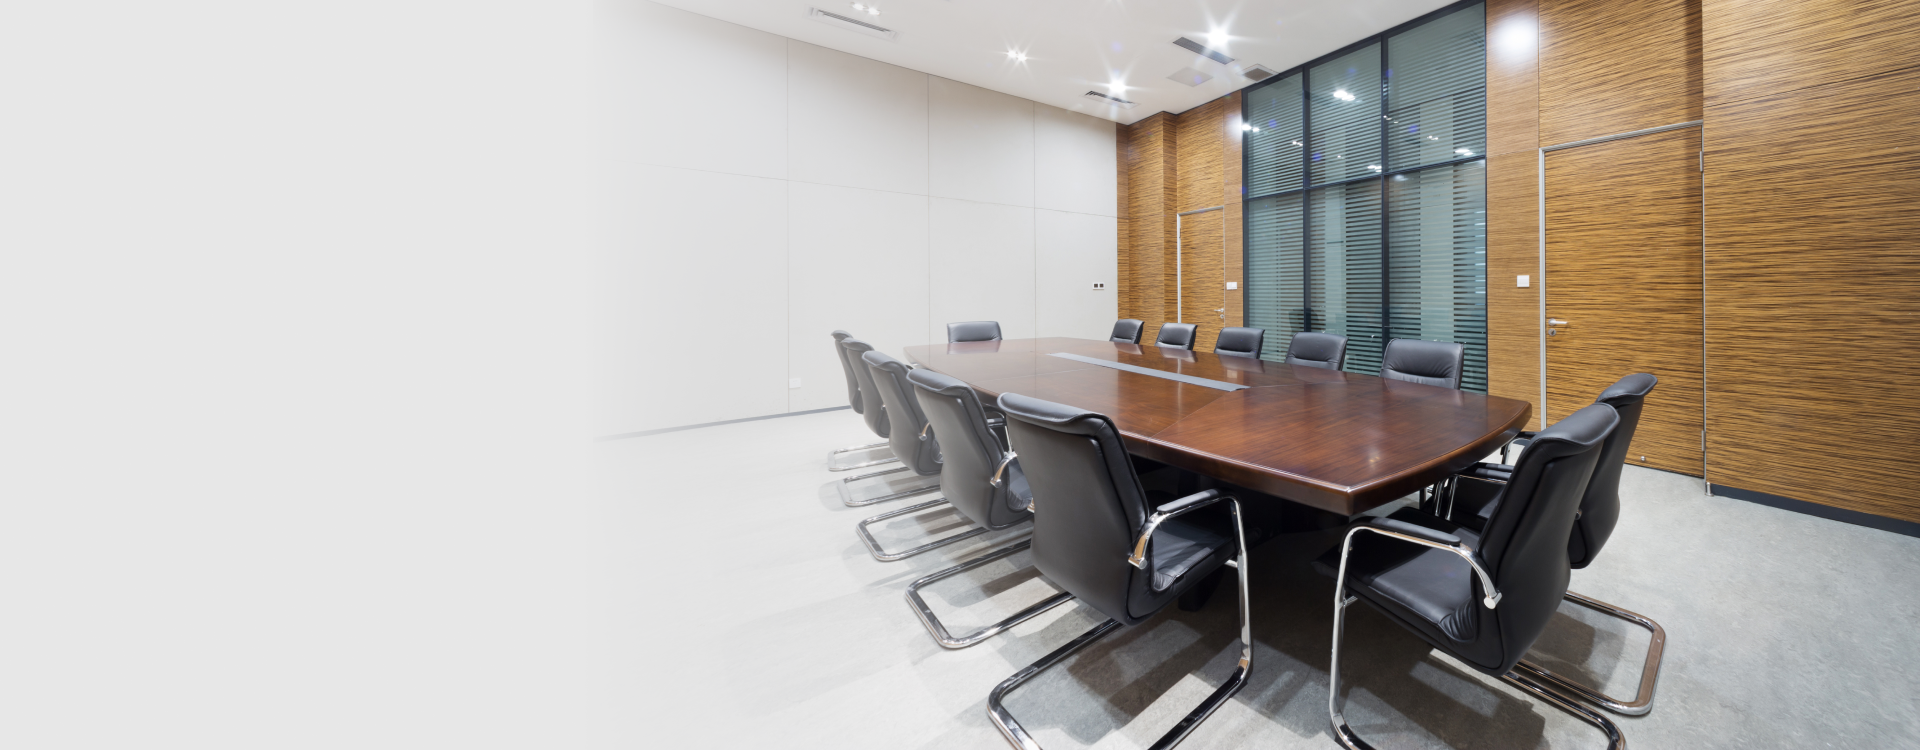 Upgrade Workspace with Premium Commercial and Office Cleaning services by Cleaning 4 You